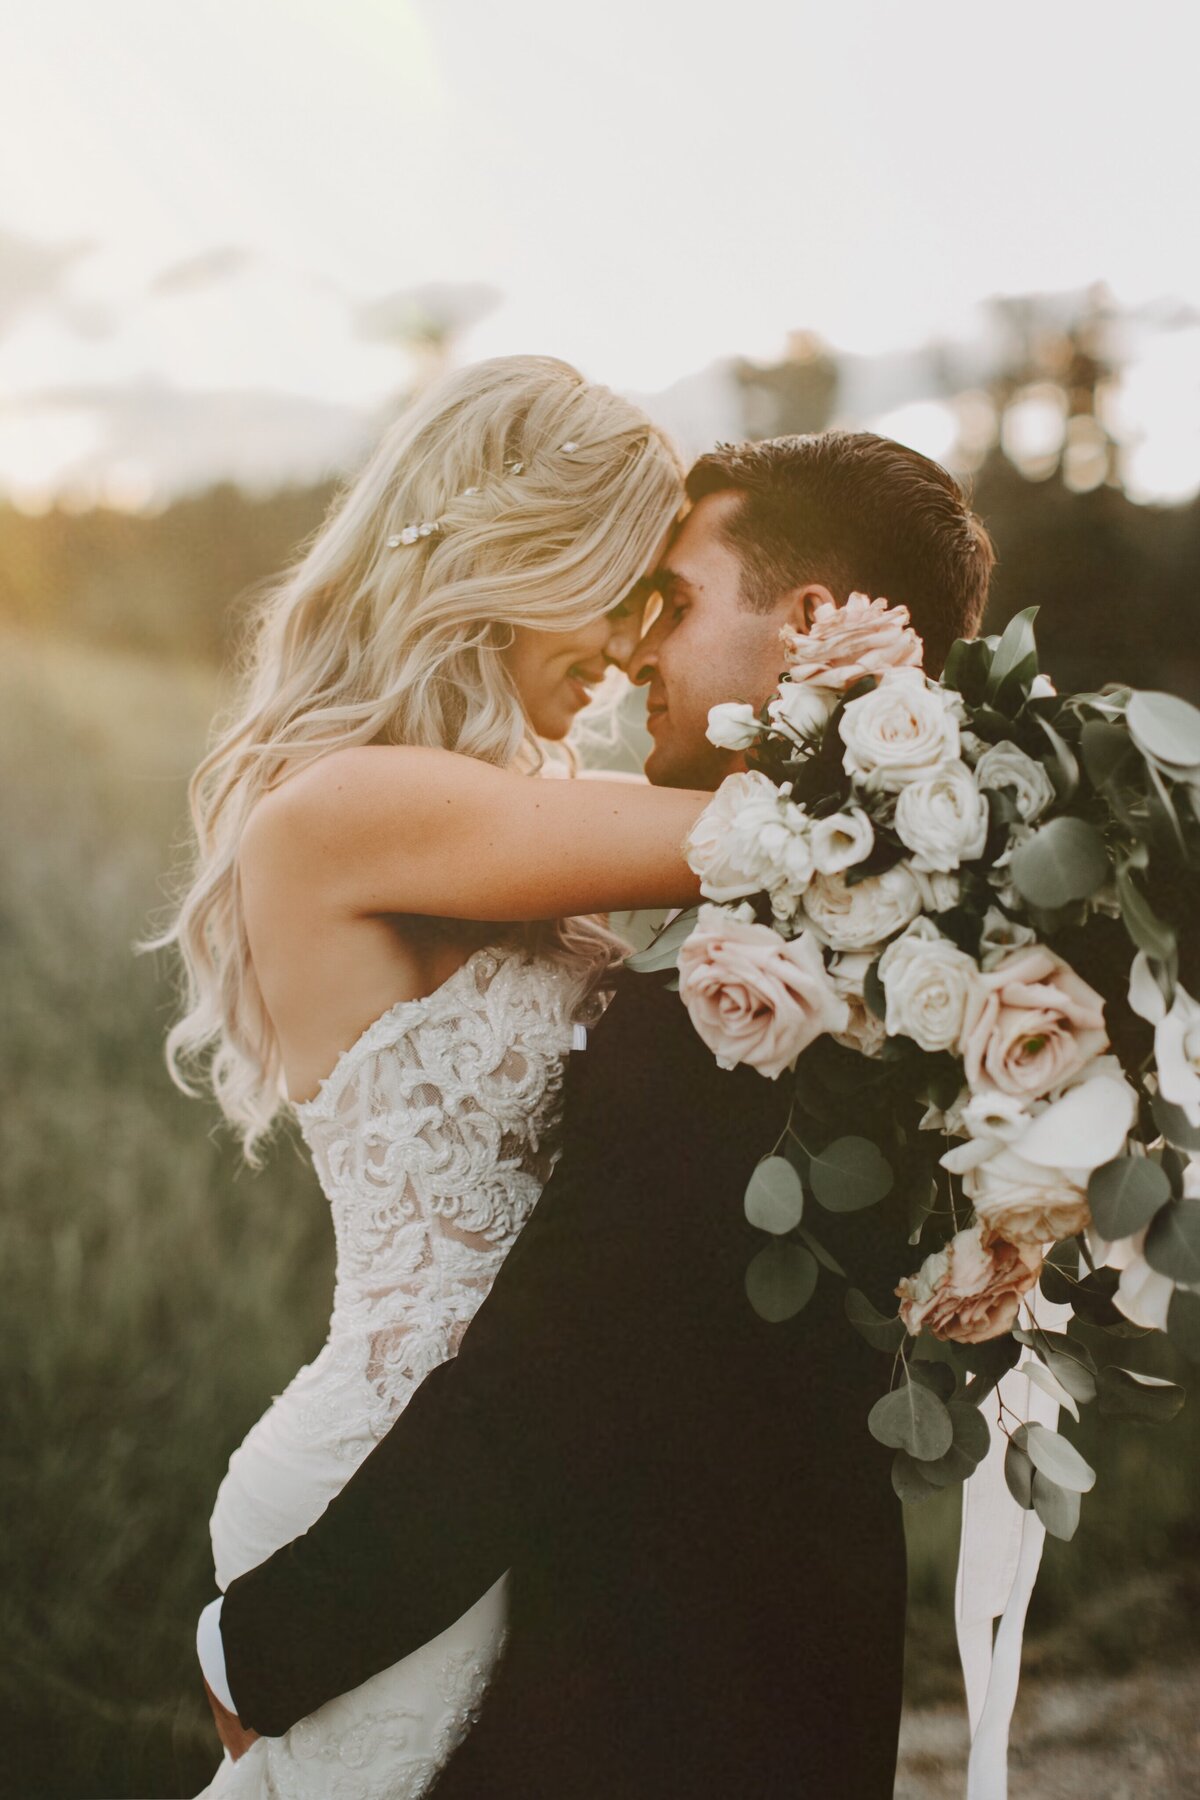 Romantic hair and makeup by Bellamore Beauty, feminine Calgary hair and makeup artist, featured on the Brontë Bride Vendor Guide.